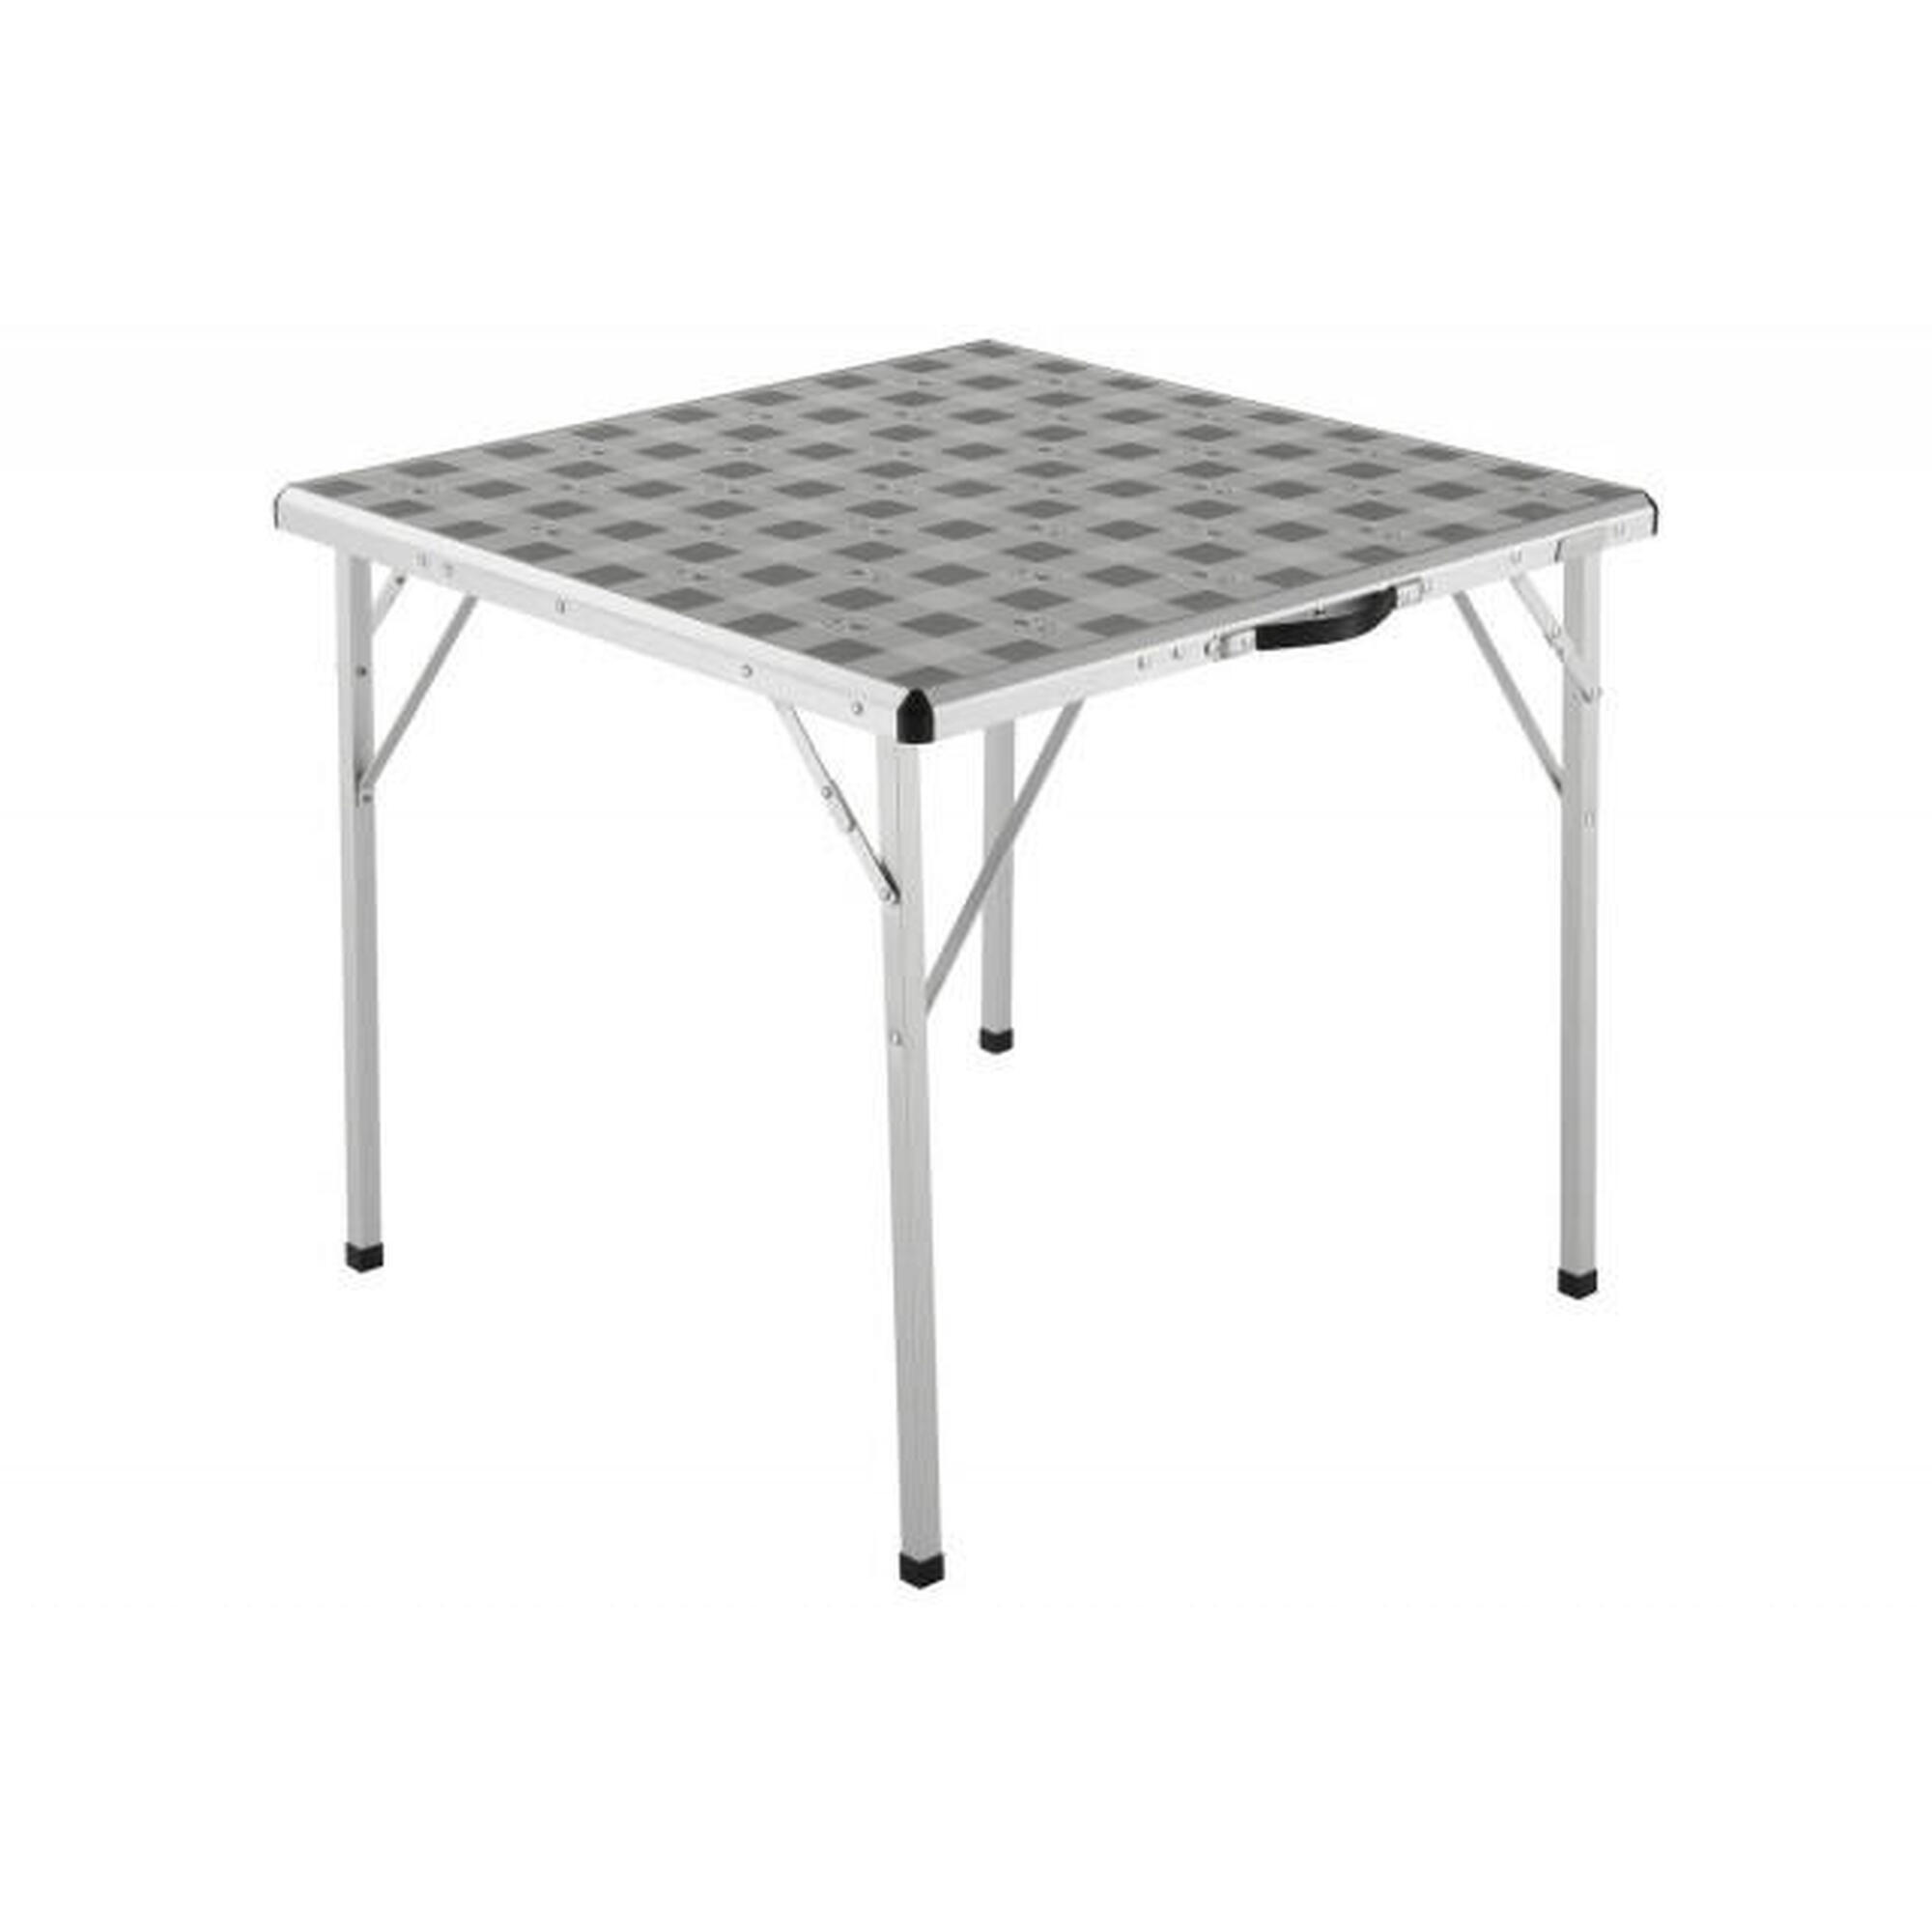 COLEMAN Camp Table Square